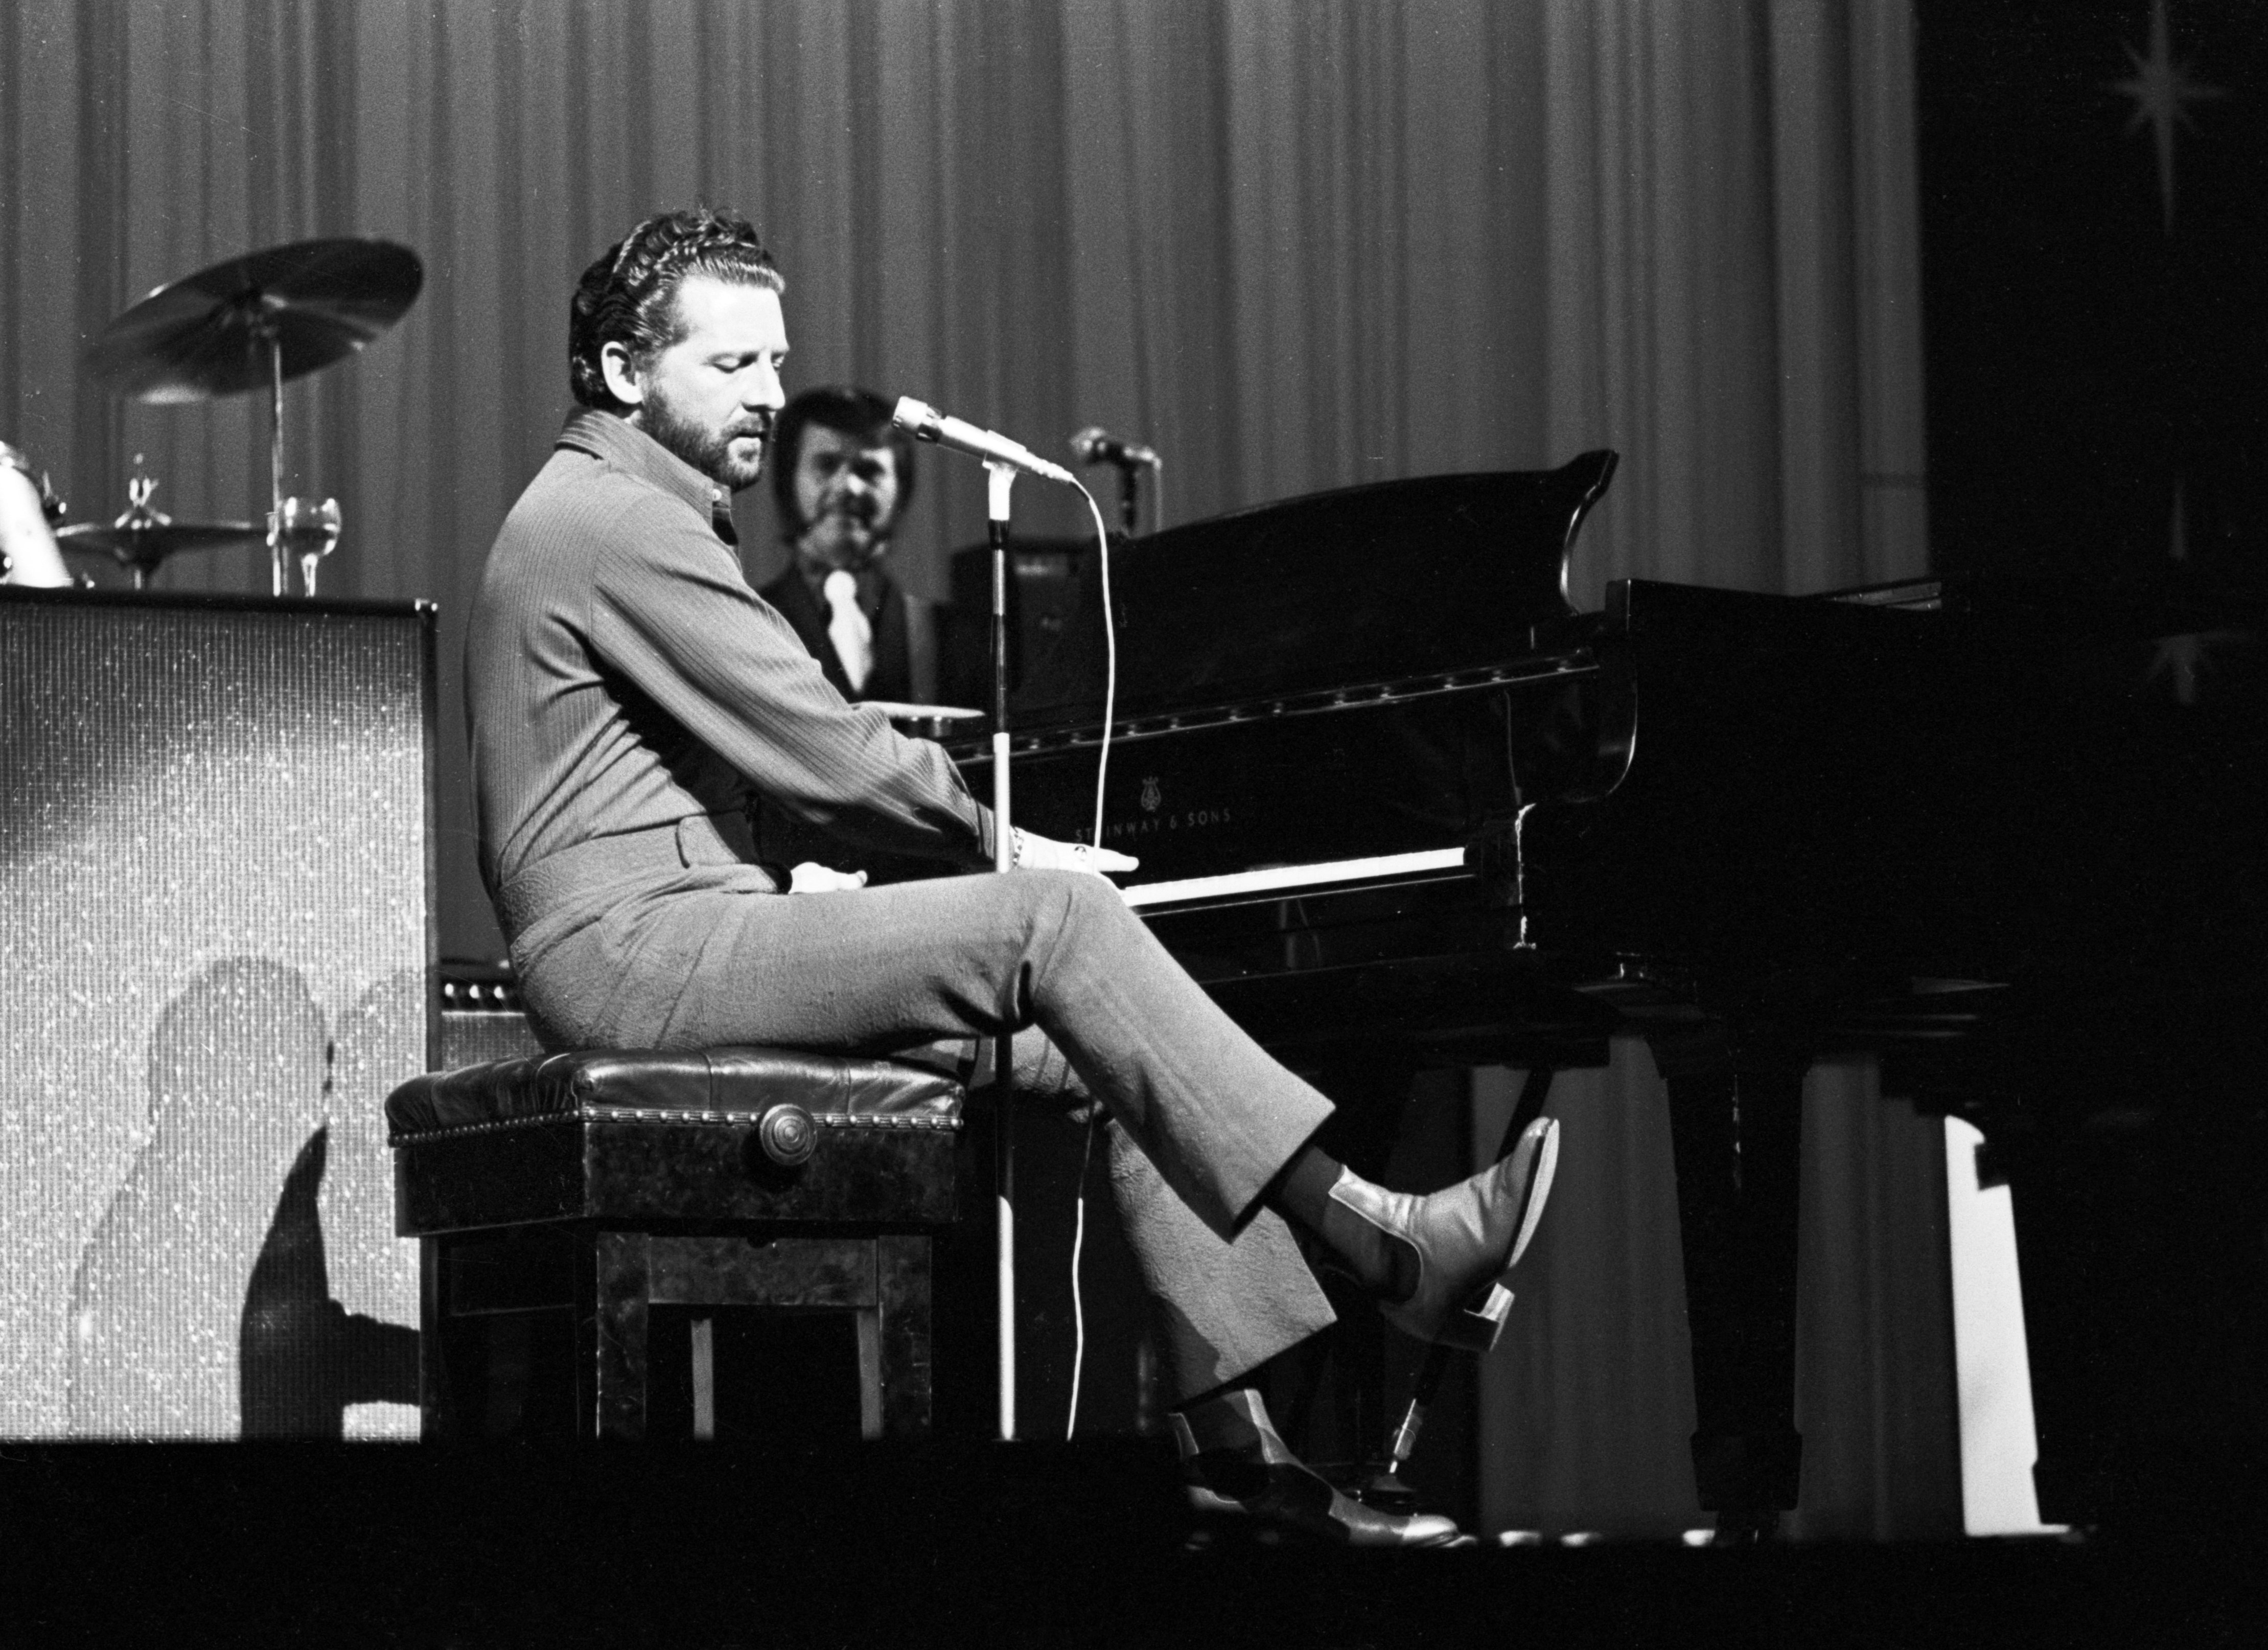 Jerry Lee Lewis at The Palladium in London, on April 23, 1972 | Source: Getty Images